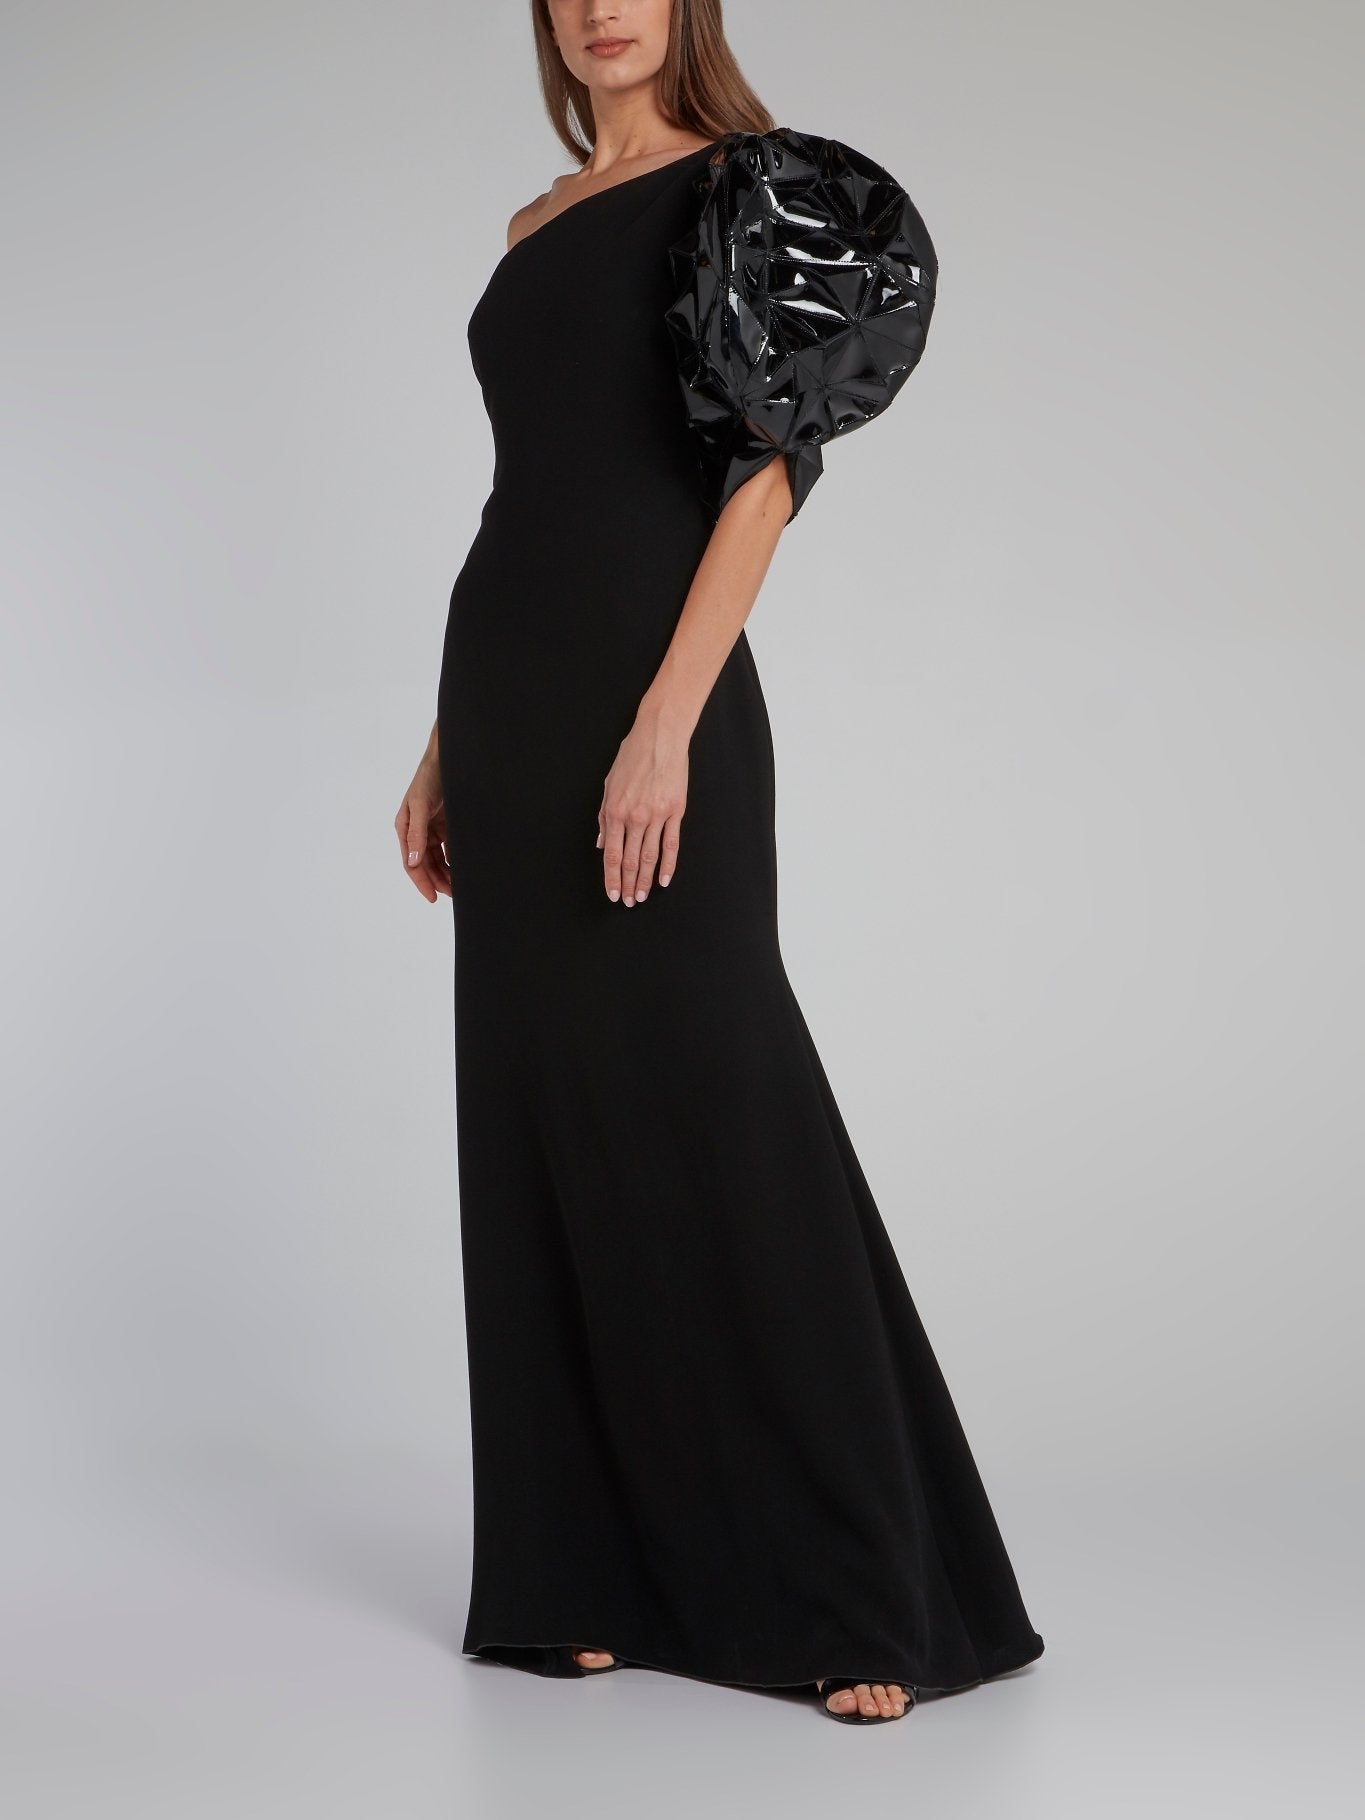 Mahonia Black One Shoulder Gown